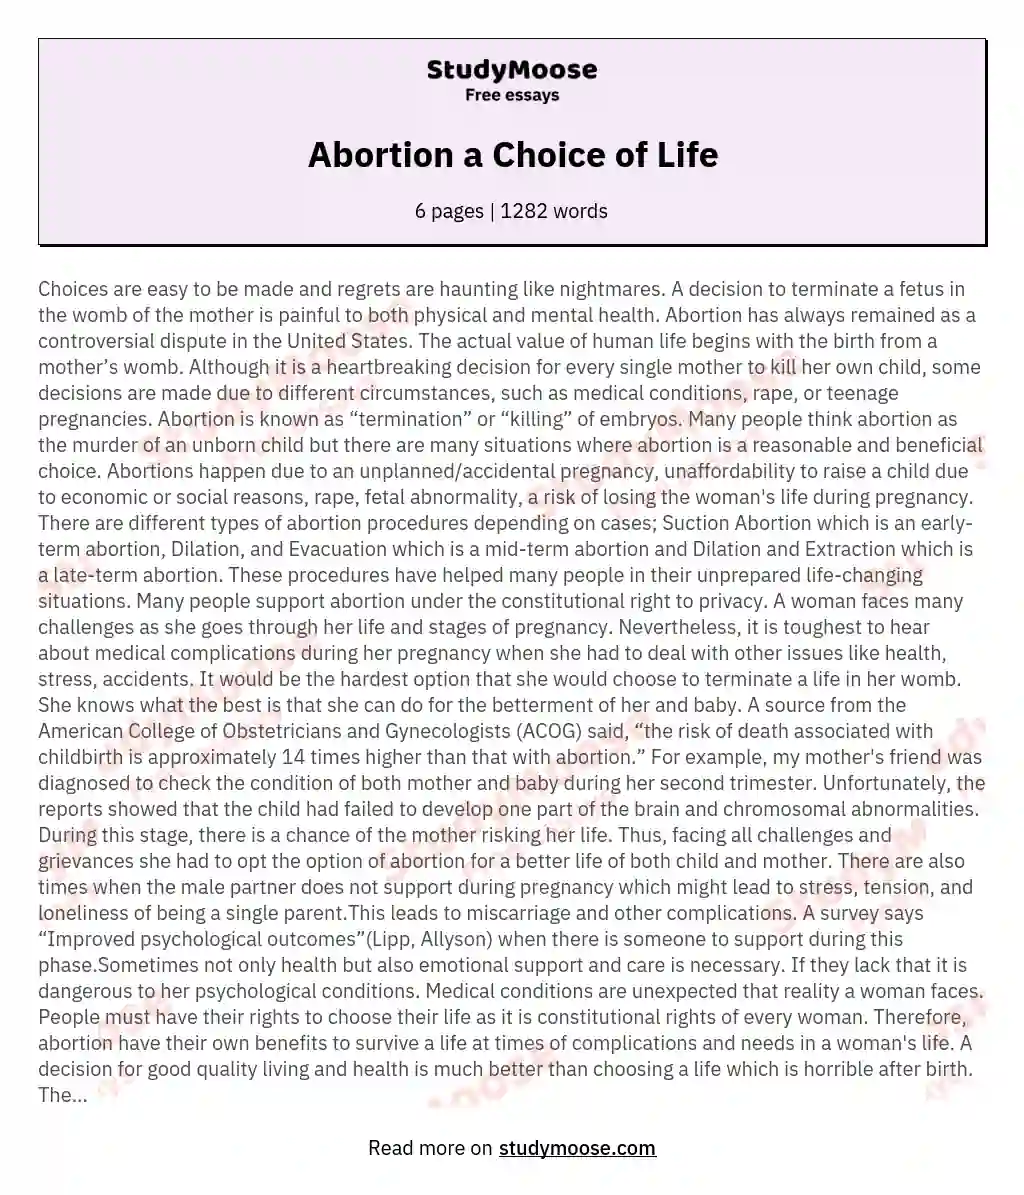 Abortion a Choice of Life essay